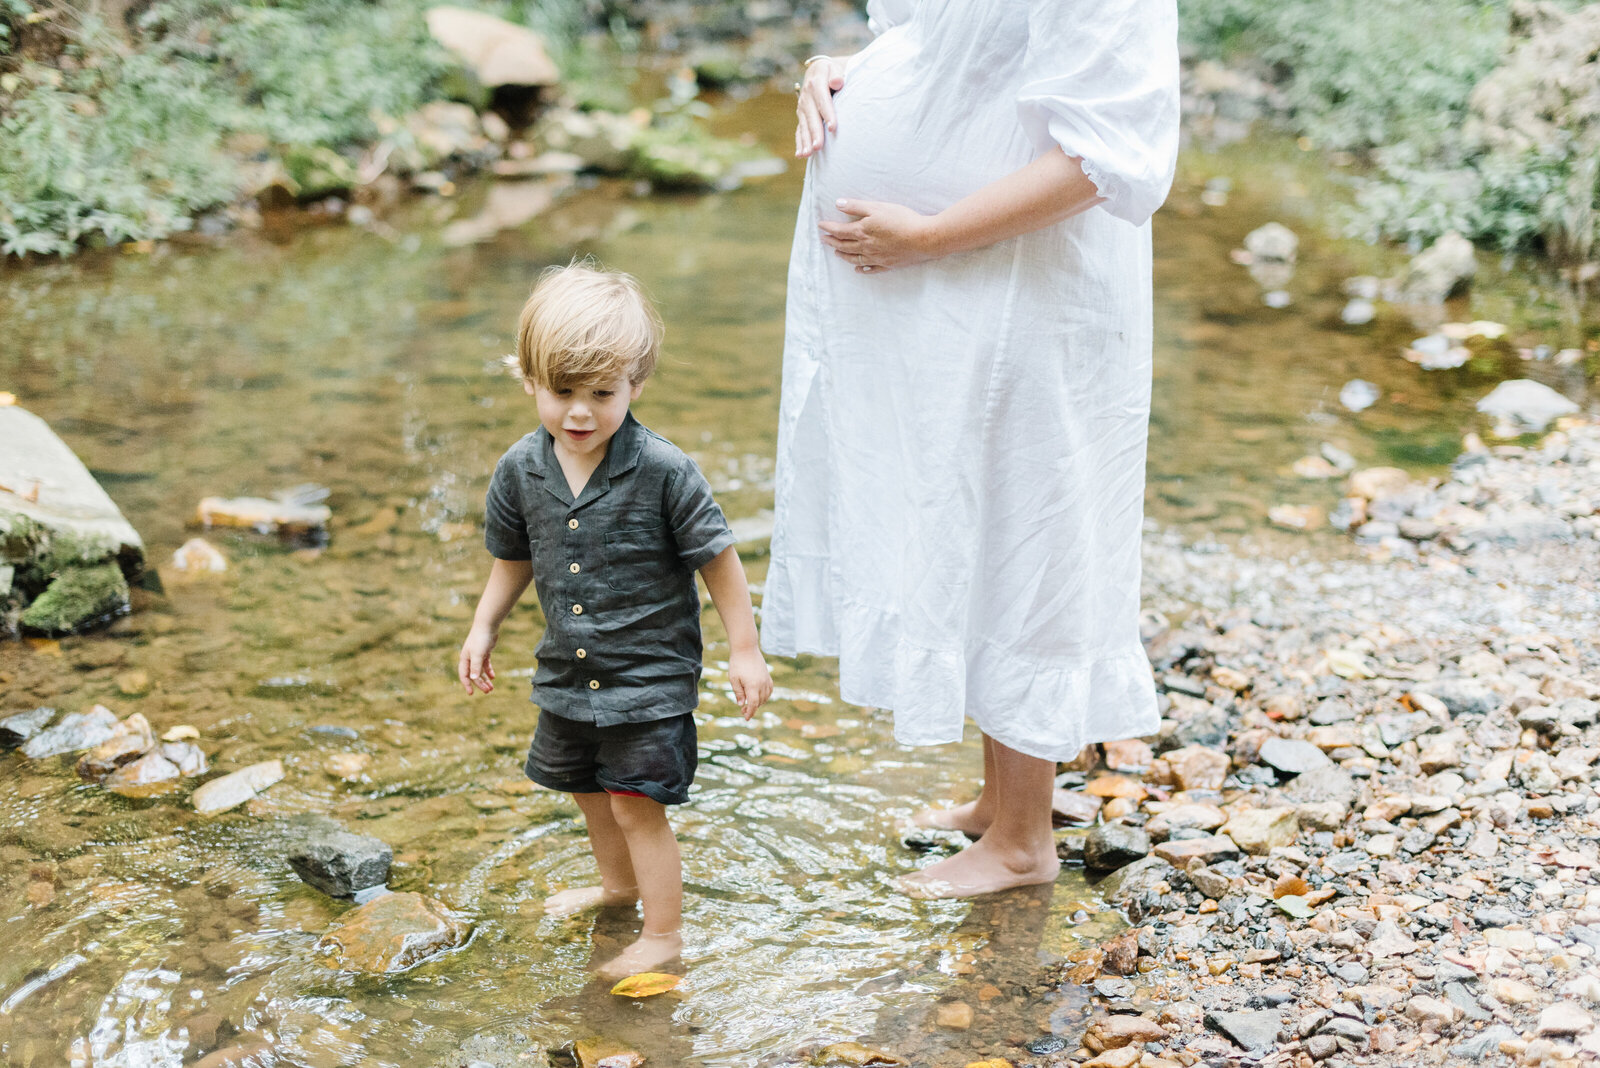 Blond child standing in creek with pregnant mother standing nearby with hand on belly - Washington DC Maternity Photographer